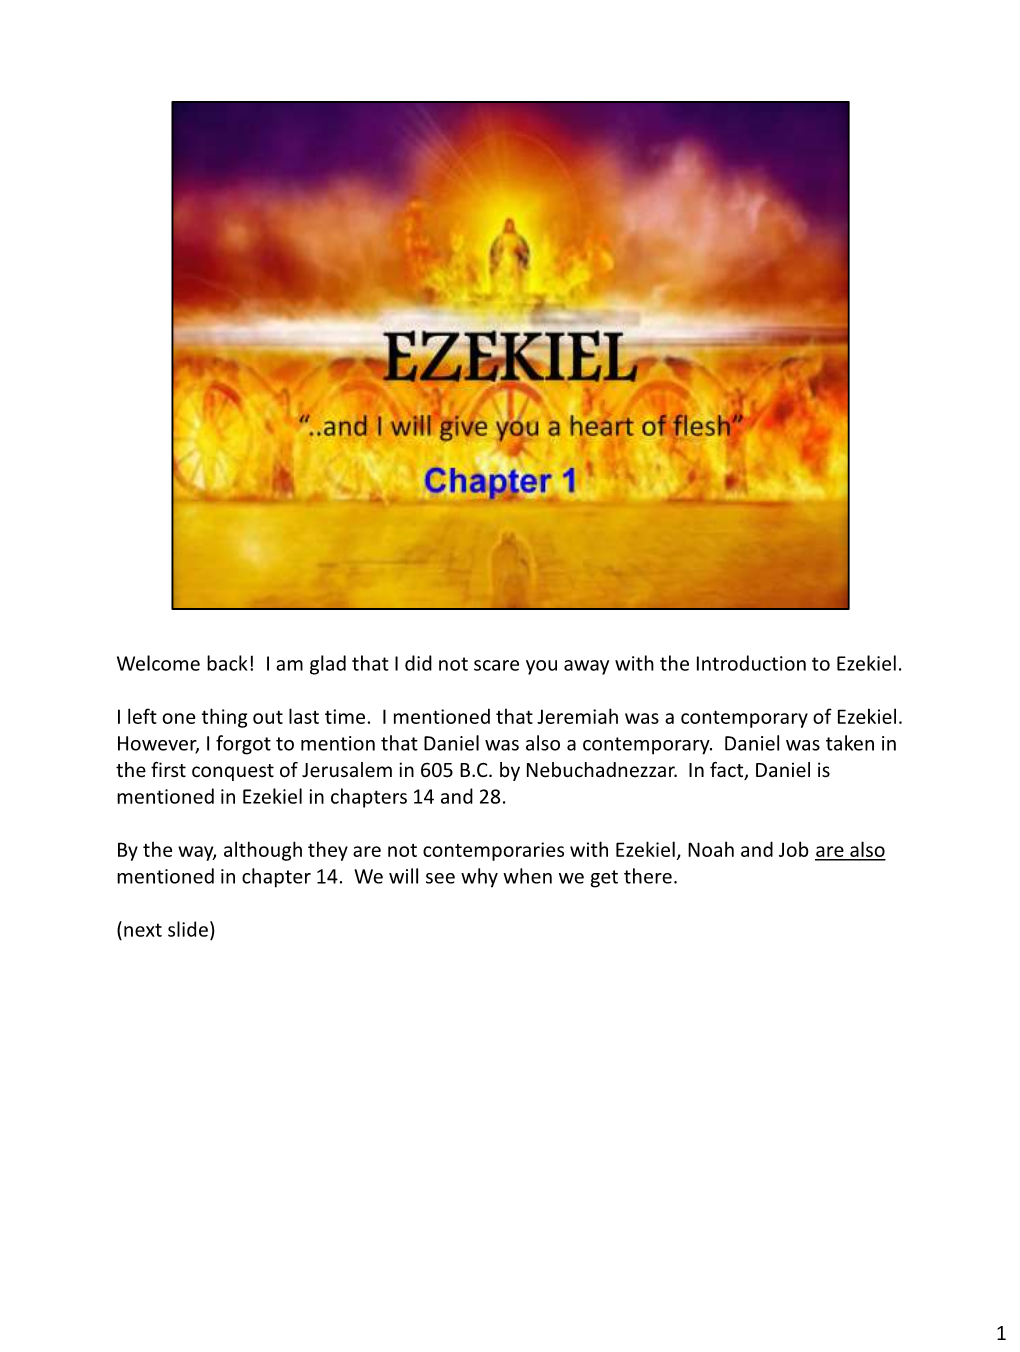 Welcome Back! I Am Glad That I Did Not Scare You Away with the Introduction to Ezekiel. I Left One Thing out Last Time. I Ment